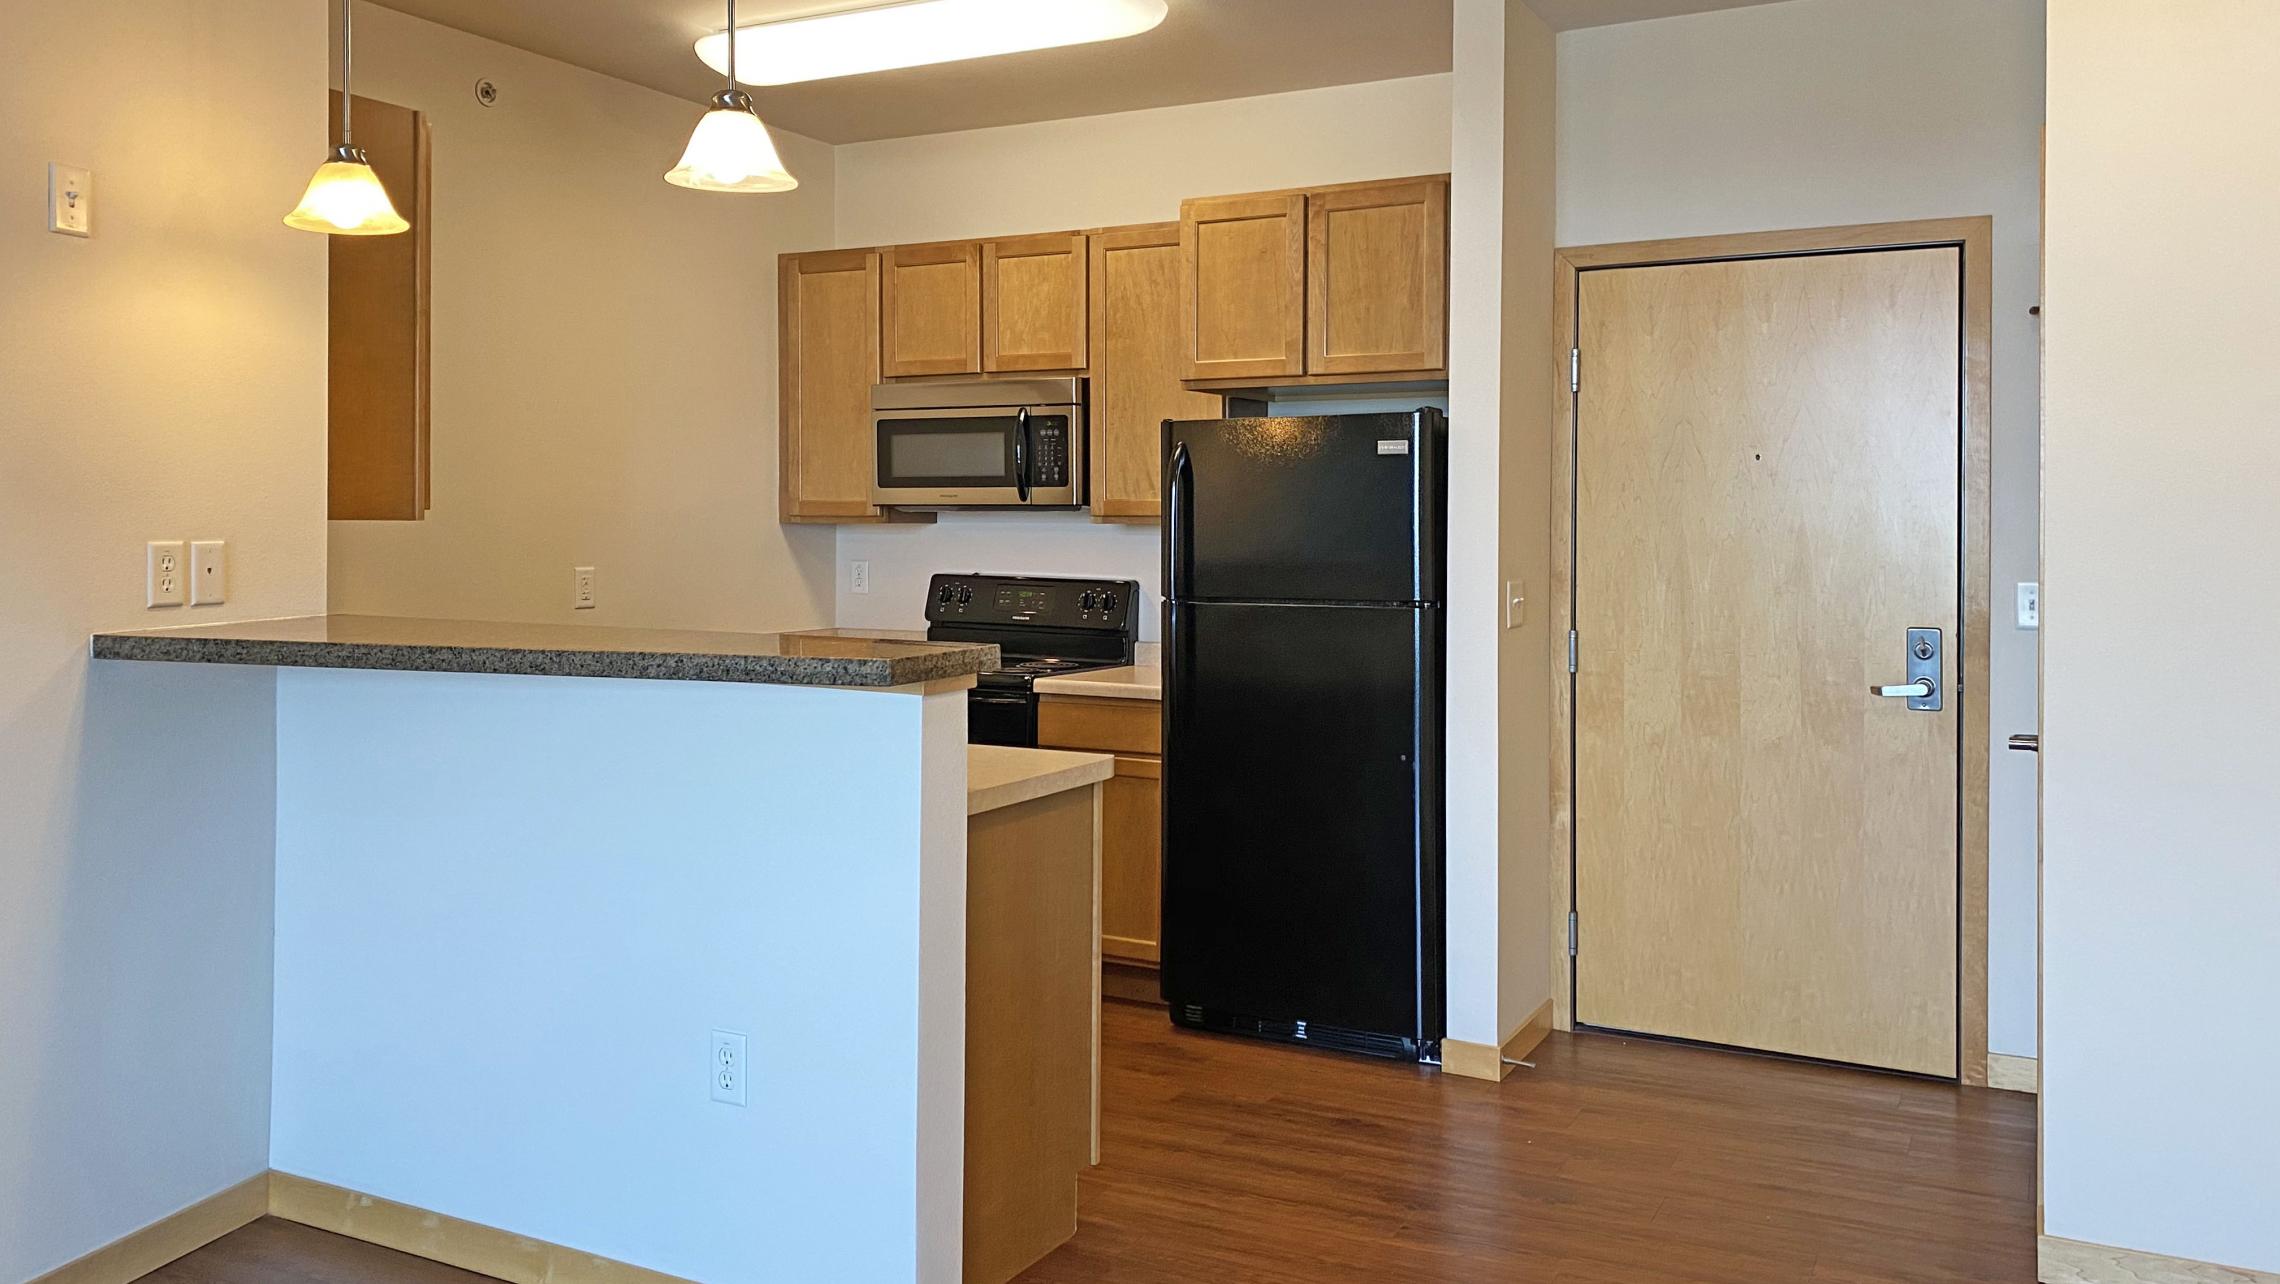 The-Depot-Apartment-1-510-One-Bedroom-Downtown-Madison-Capitol-View-Balcony-Lake-Cats-Fintess-Terrace-City-Living-Kithcen-Bathroom-Upscale